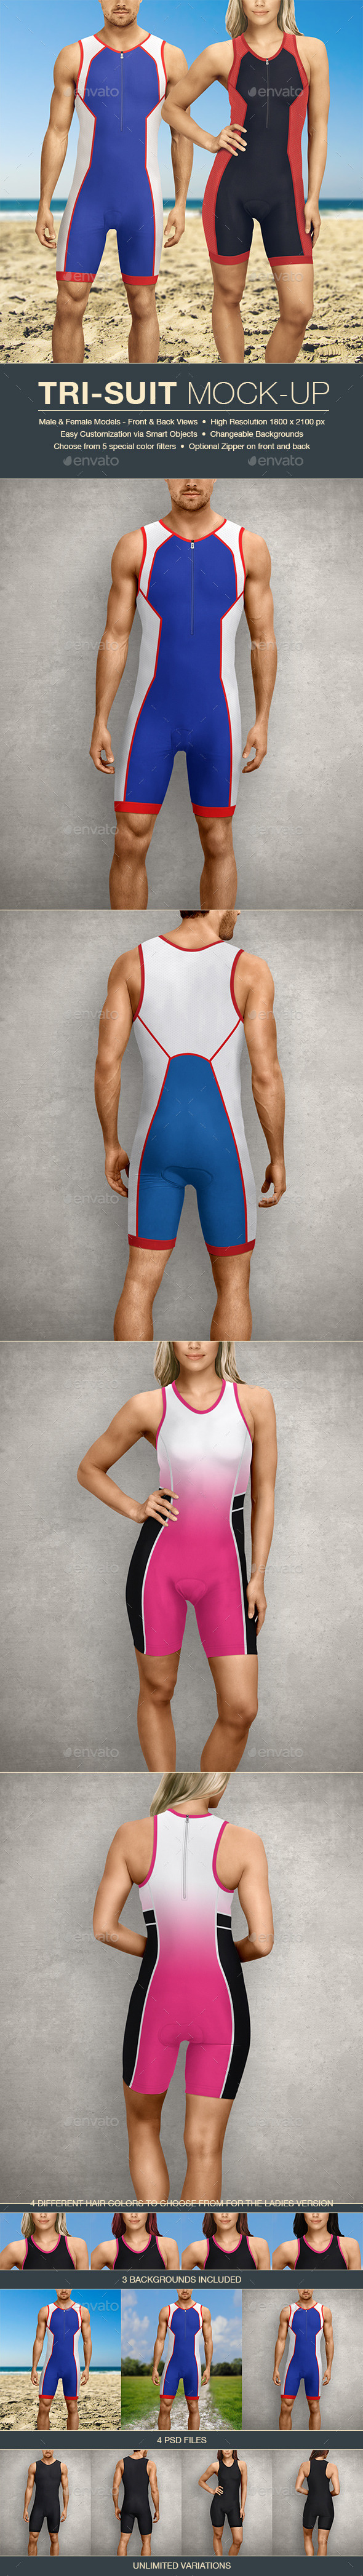 Download Tri-Suit Mockup by Voxel3D | GraphicRiver